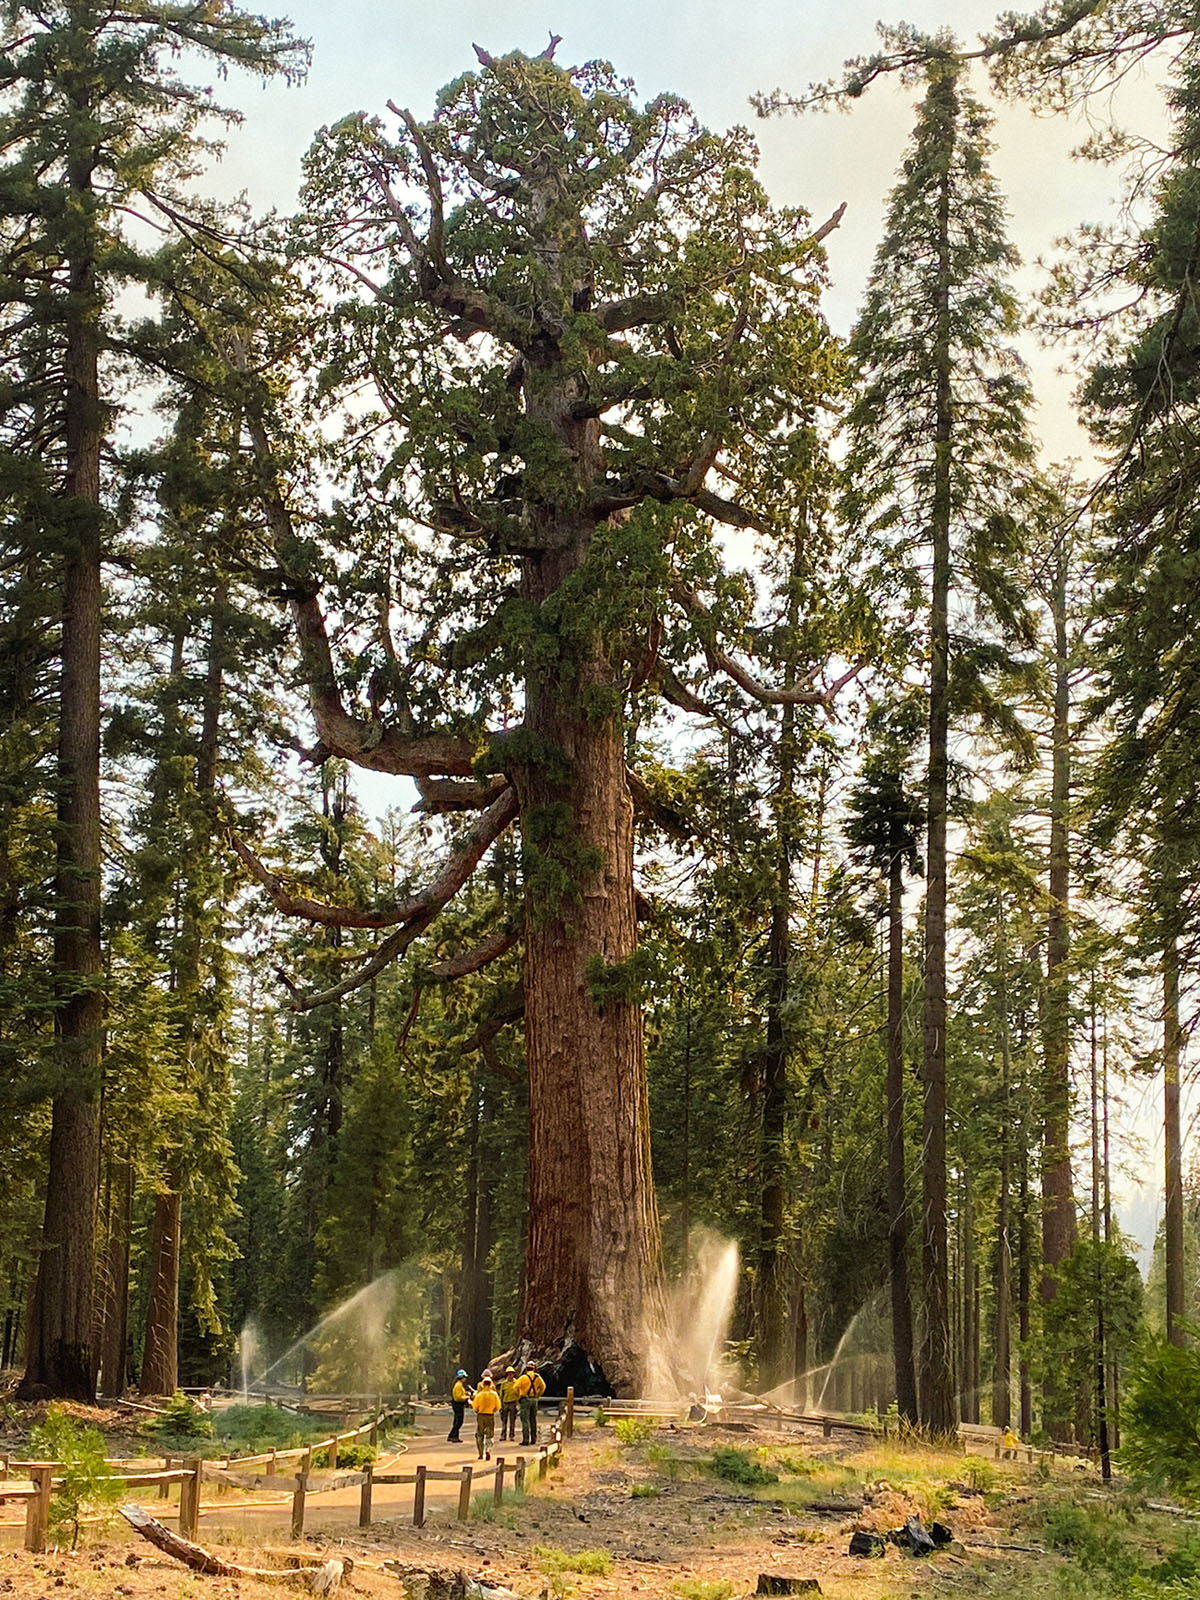 Sprinklers protect the Grizzly Giant sequoia tree during the Washburn Fire. Photo by M. Steller, NPS.